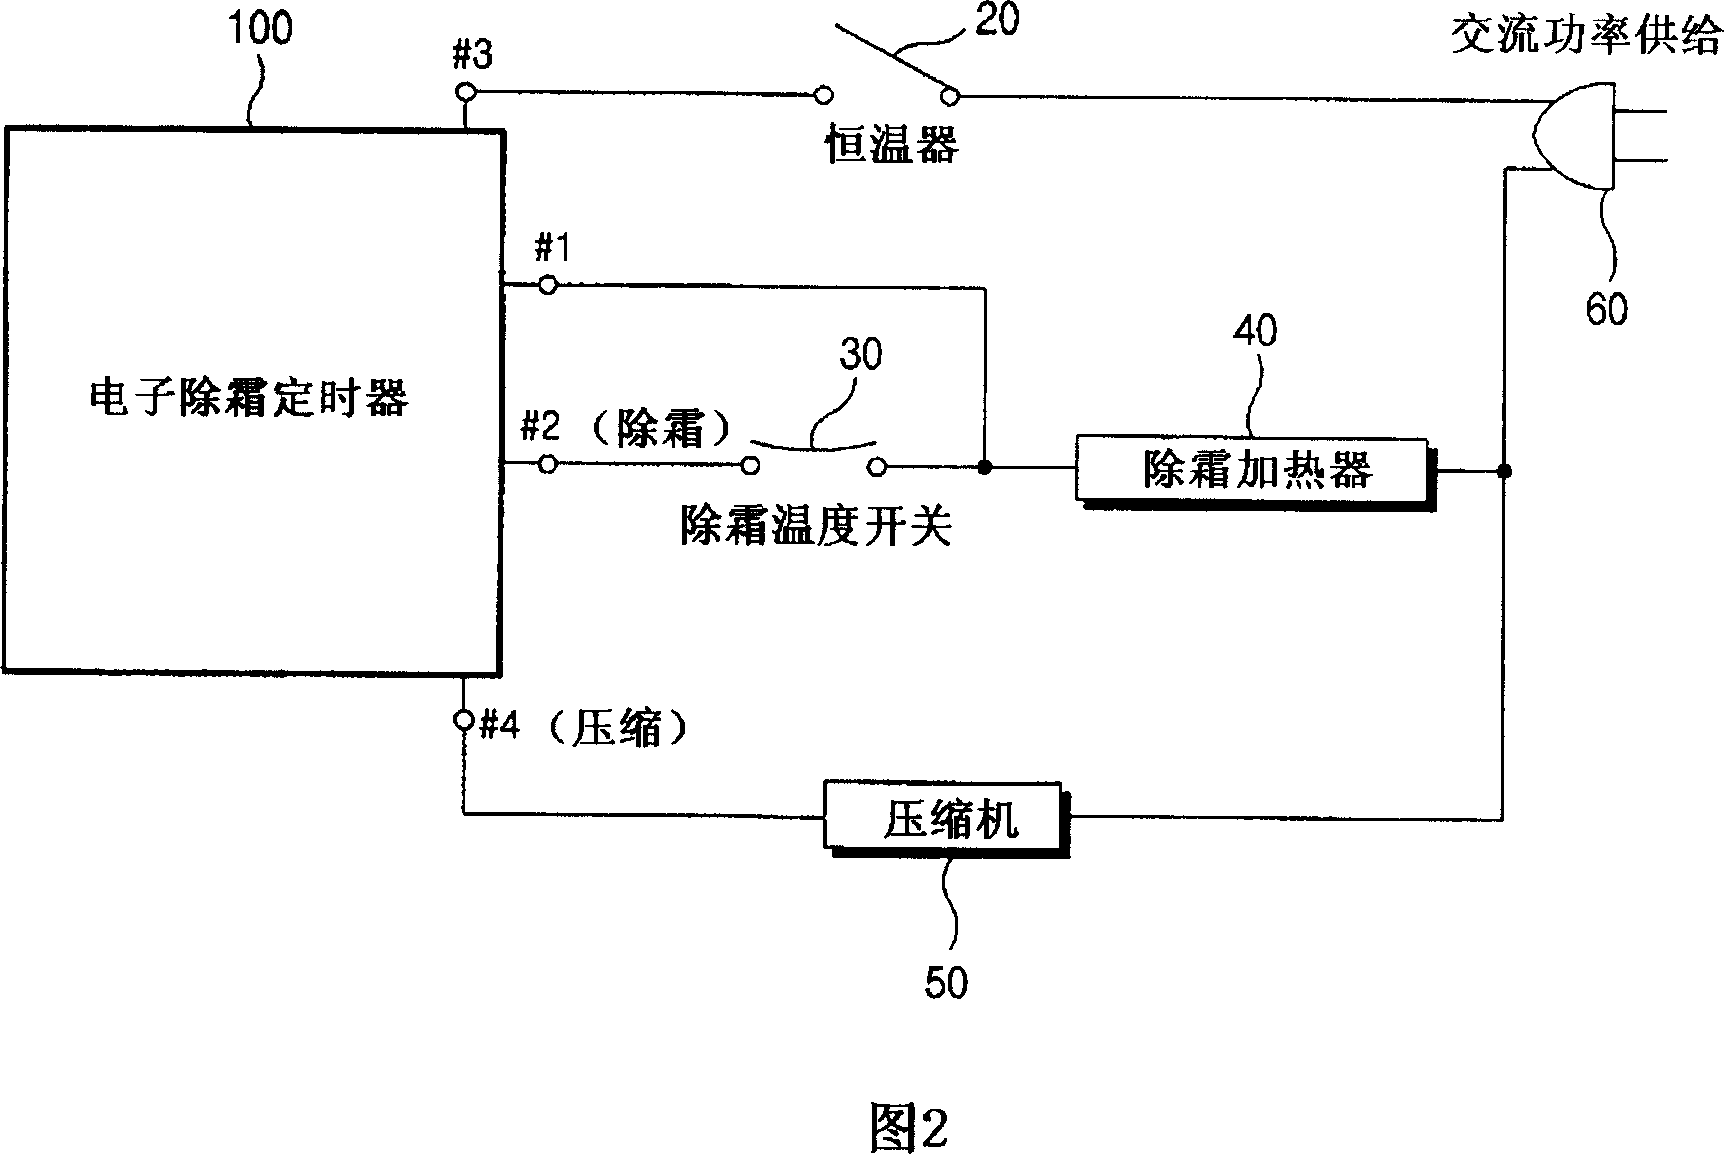 Electronic defrost timer for mechanical refrigerator